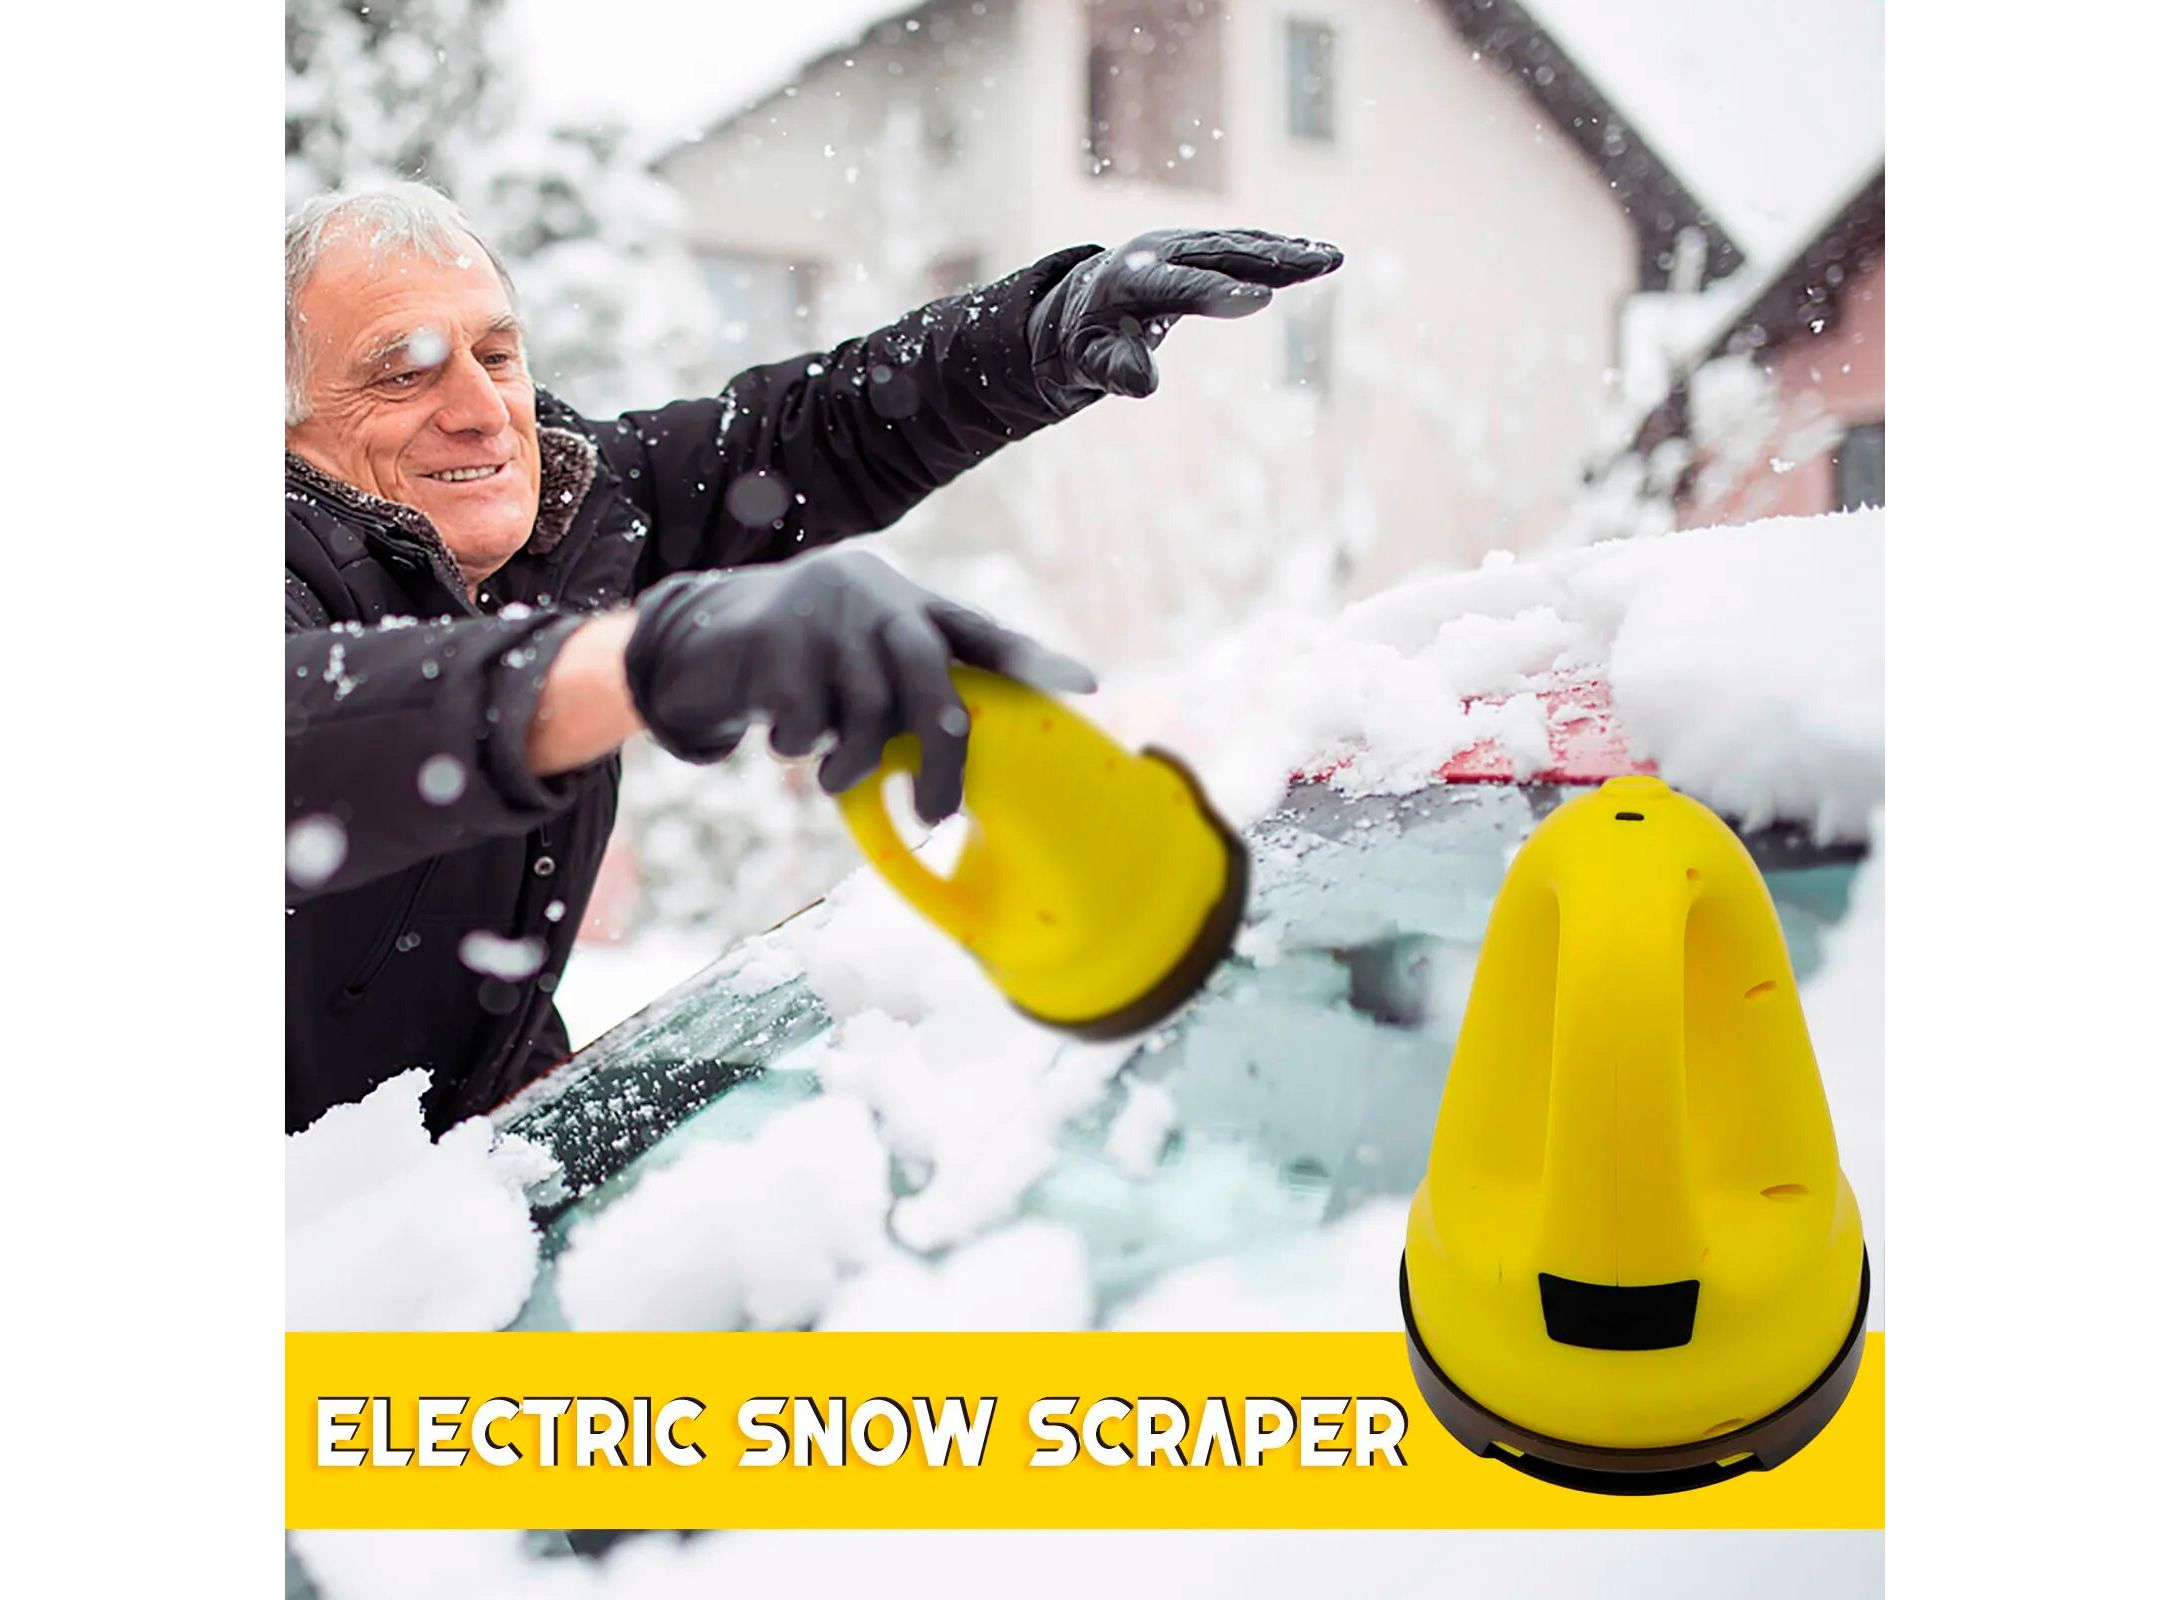 https://protechshop.co.uk/images/thumbnails/2171/1600/detailed/101/USB-Car-Ice-Scraper-Electric-Heated-Snow-Removal-Windshield-Glass-Defrost-Clean-Tools-Auto-Car-Window_0bp5-b7.jpg